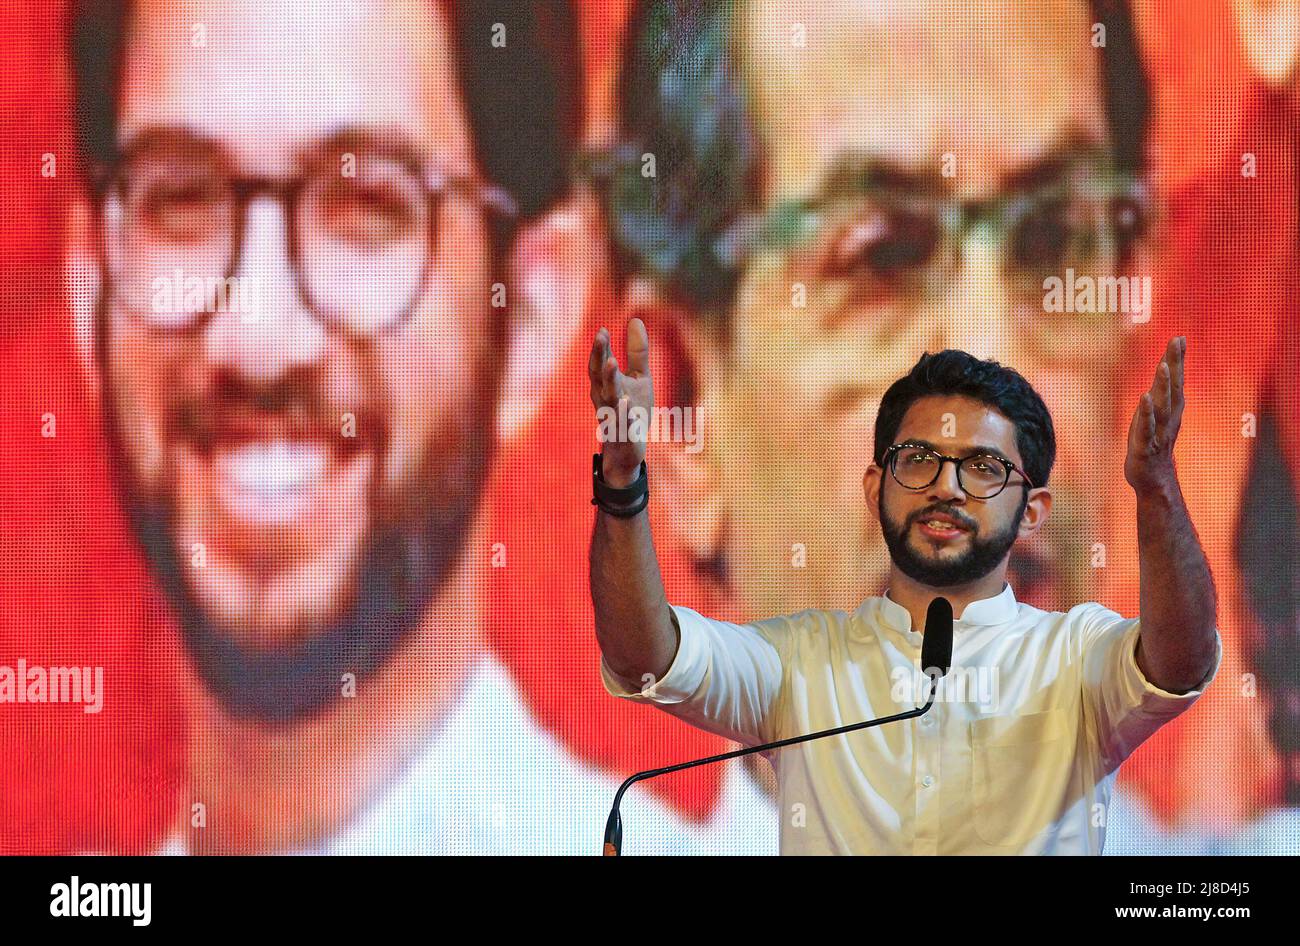 Cabinet Minister of Tourism and Environment (Maharashtra), Aditya Thackeray speaks during the Shiv Sena rally. The rally marked the beginning of the party's second phase of 'Shiv Sampark Abhiyan' party's outreach programme with the voters and karyakartas (workers). Stock Photo